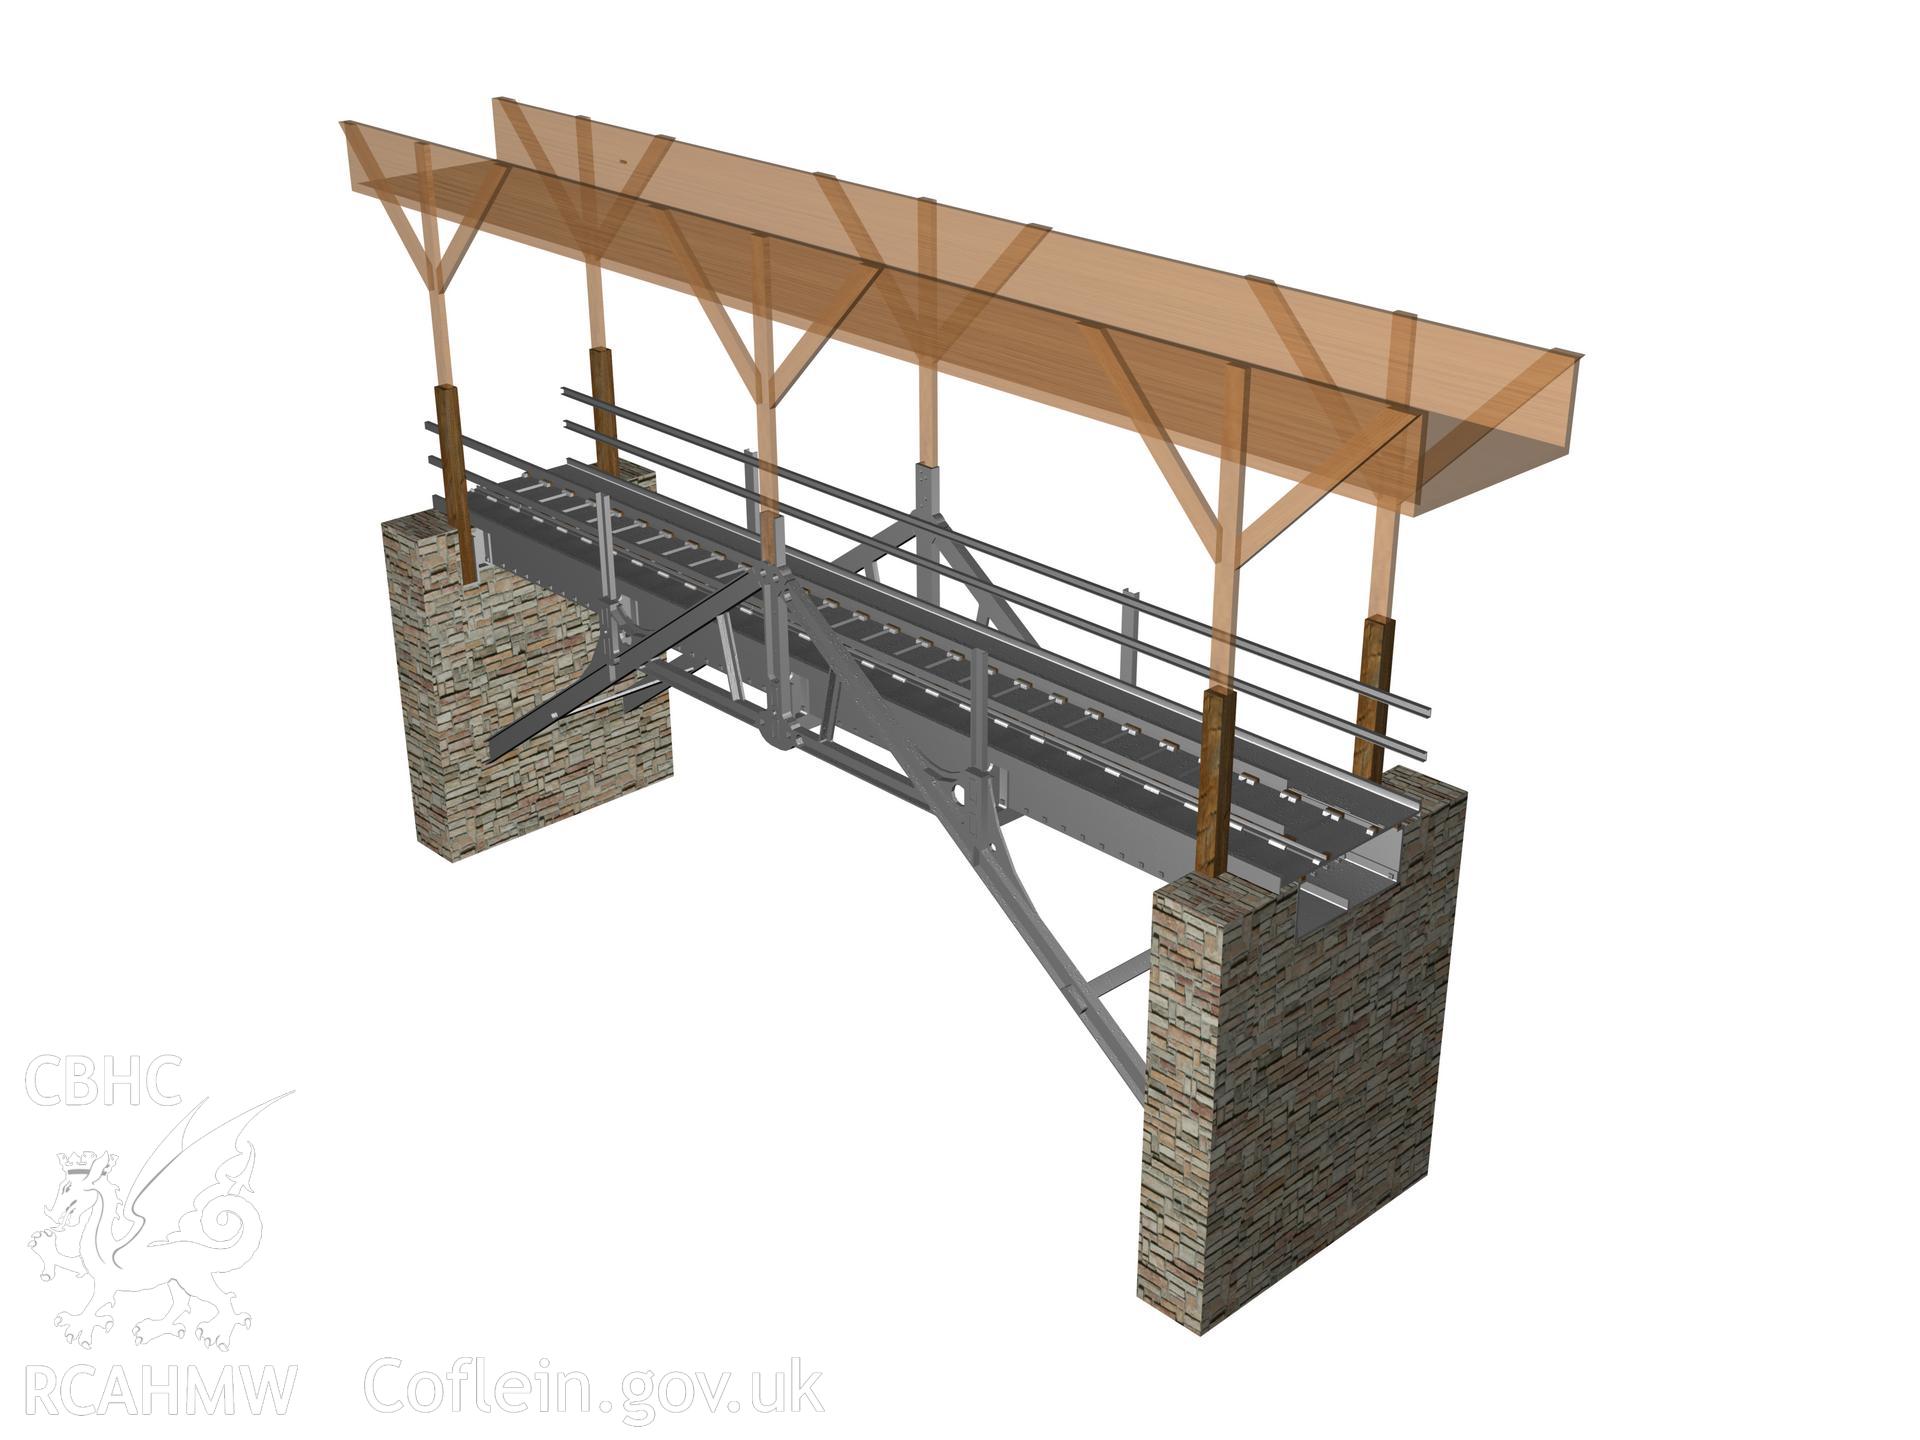 Rendered still in a south-east isometric view, taken from the 3D Studio Max model, from an RCAHMW digital survey, Pont y Cafnau Aqueduct, carried out by Susan Fielding, 04/10/2006.